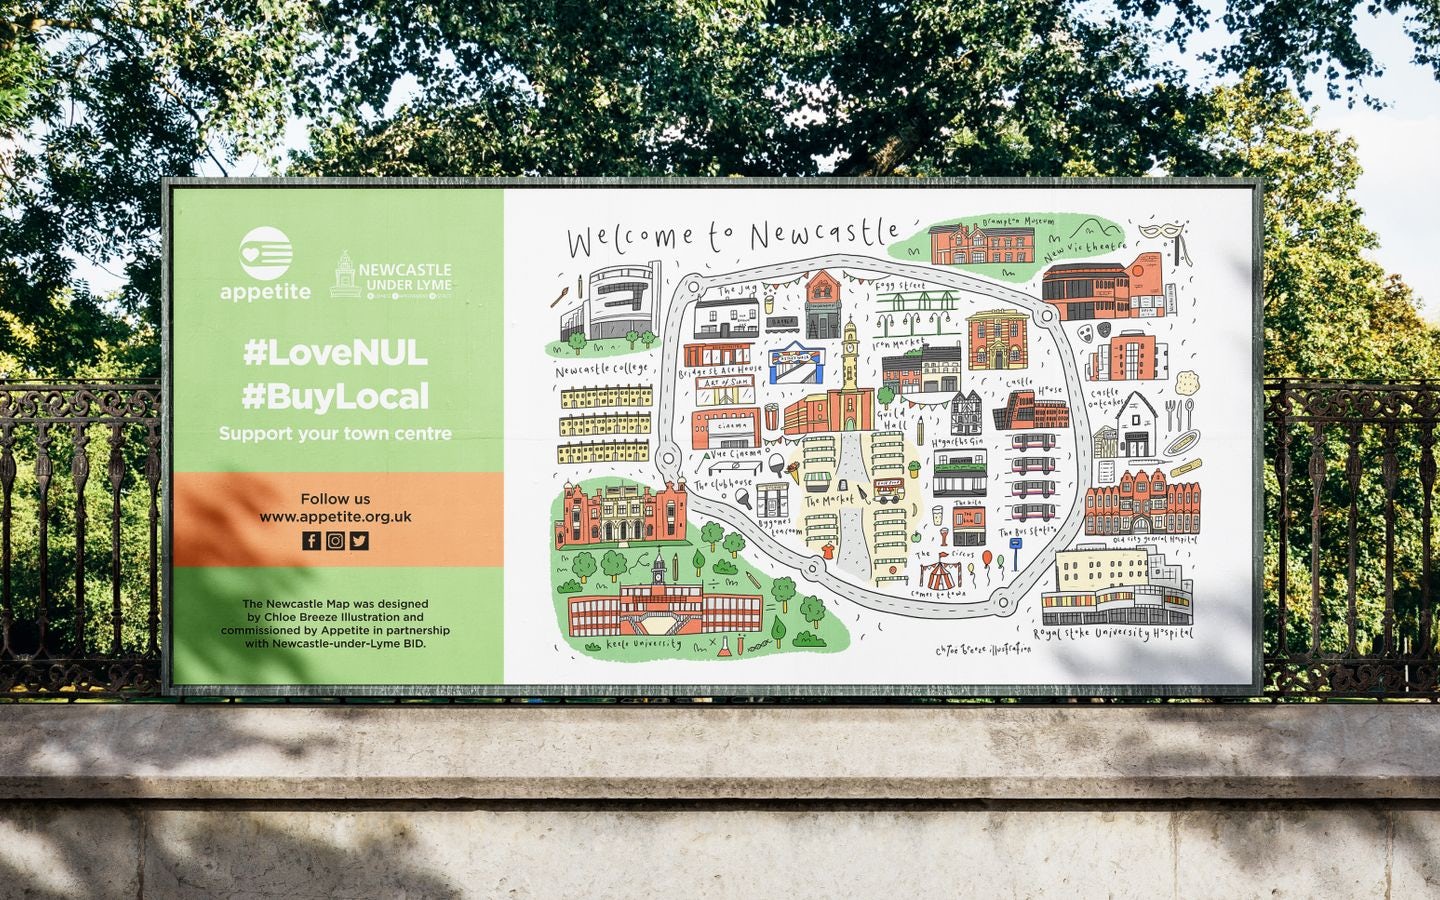 Appetite advertisement on a billboard showing a 'Welcome to Newcastle' illustrated map with #LoveNUL and #BuyLocal, displayed on a metal fence in a public area.